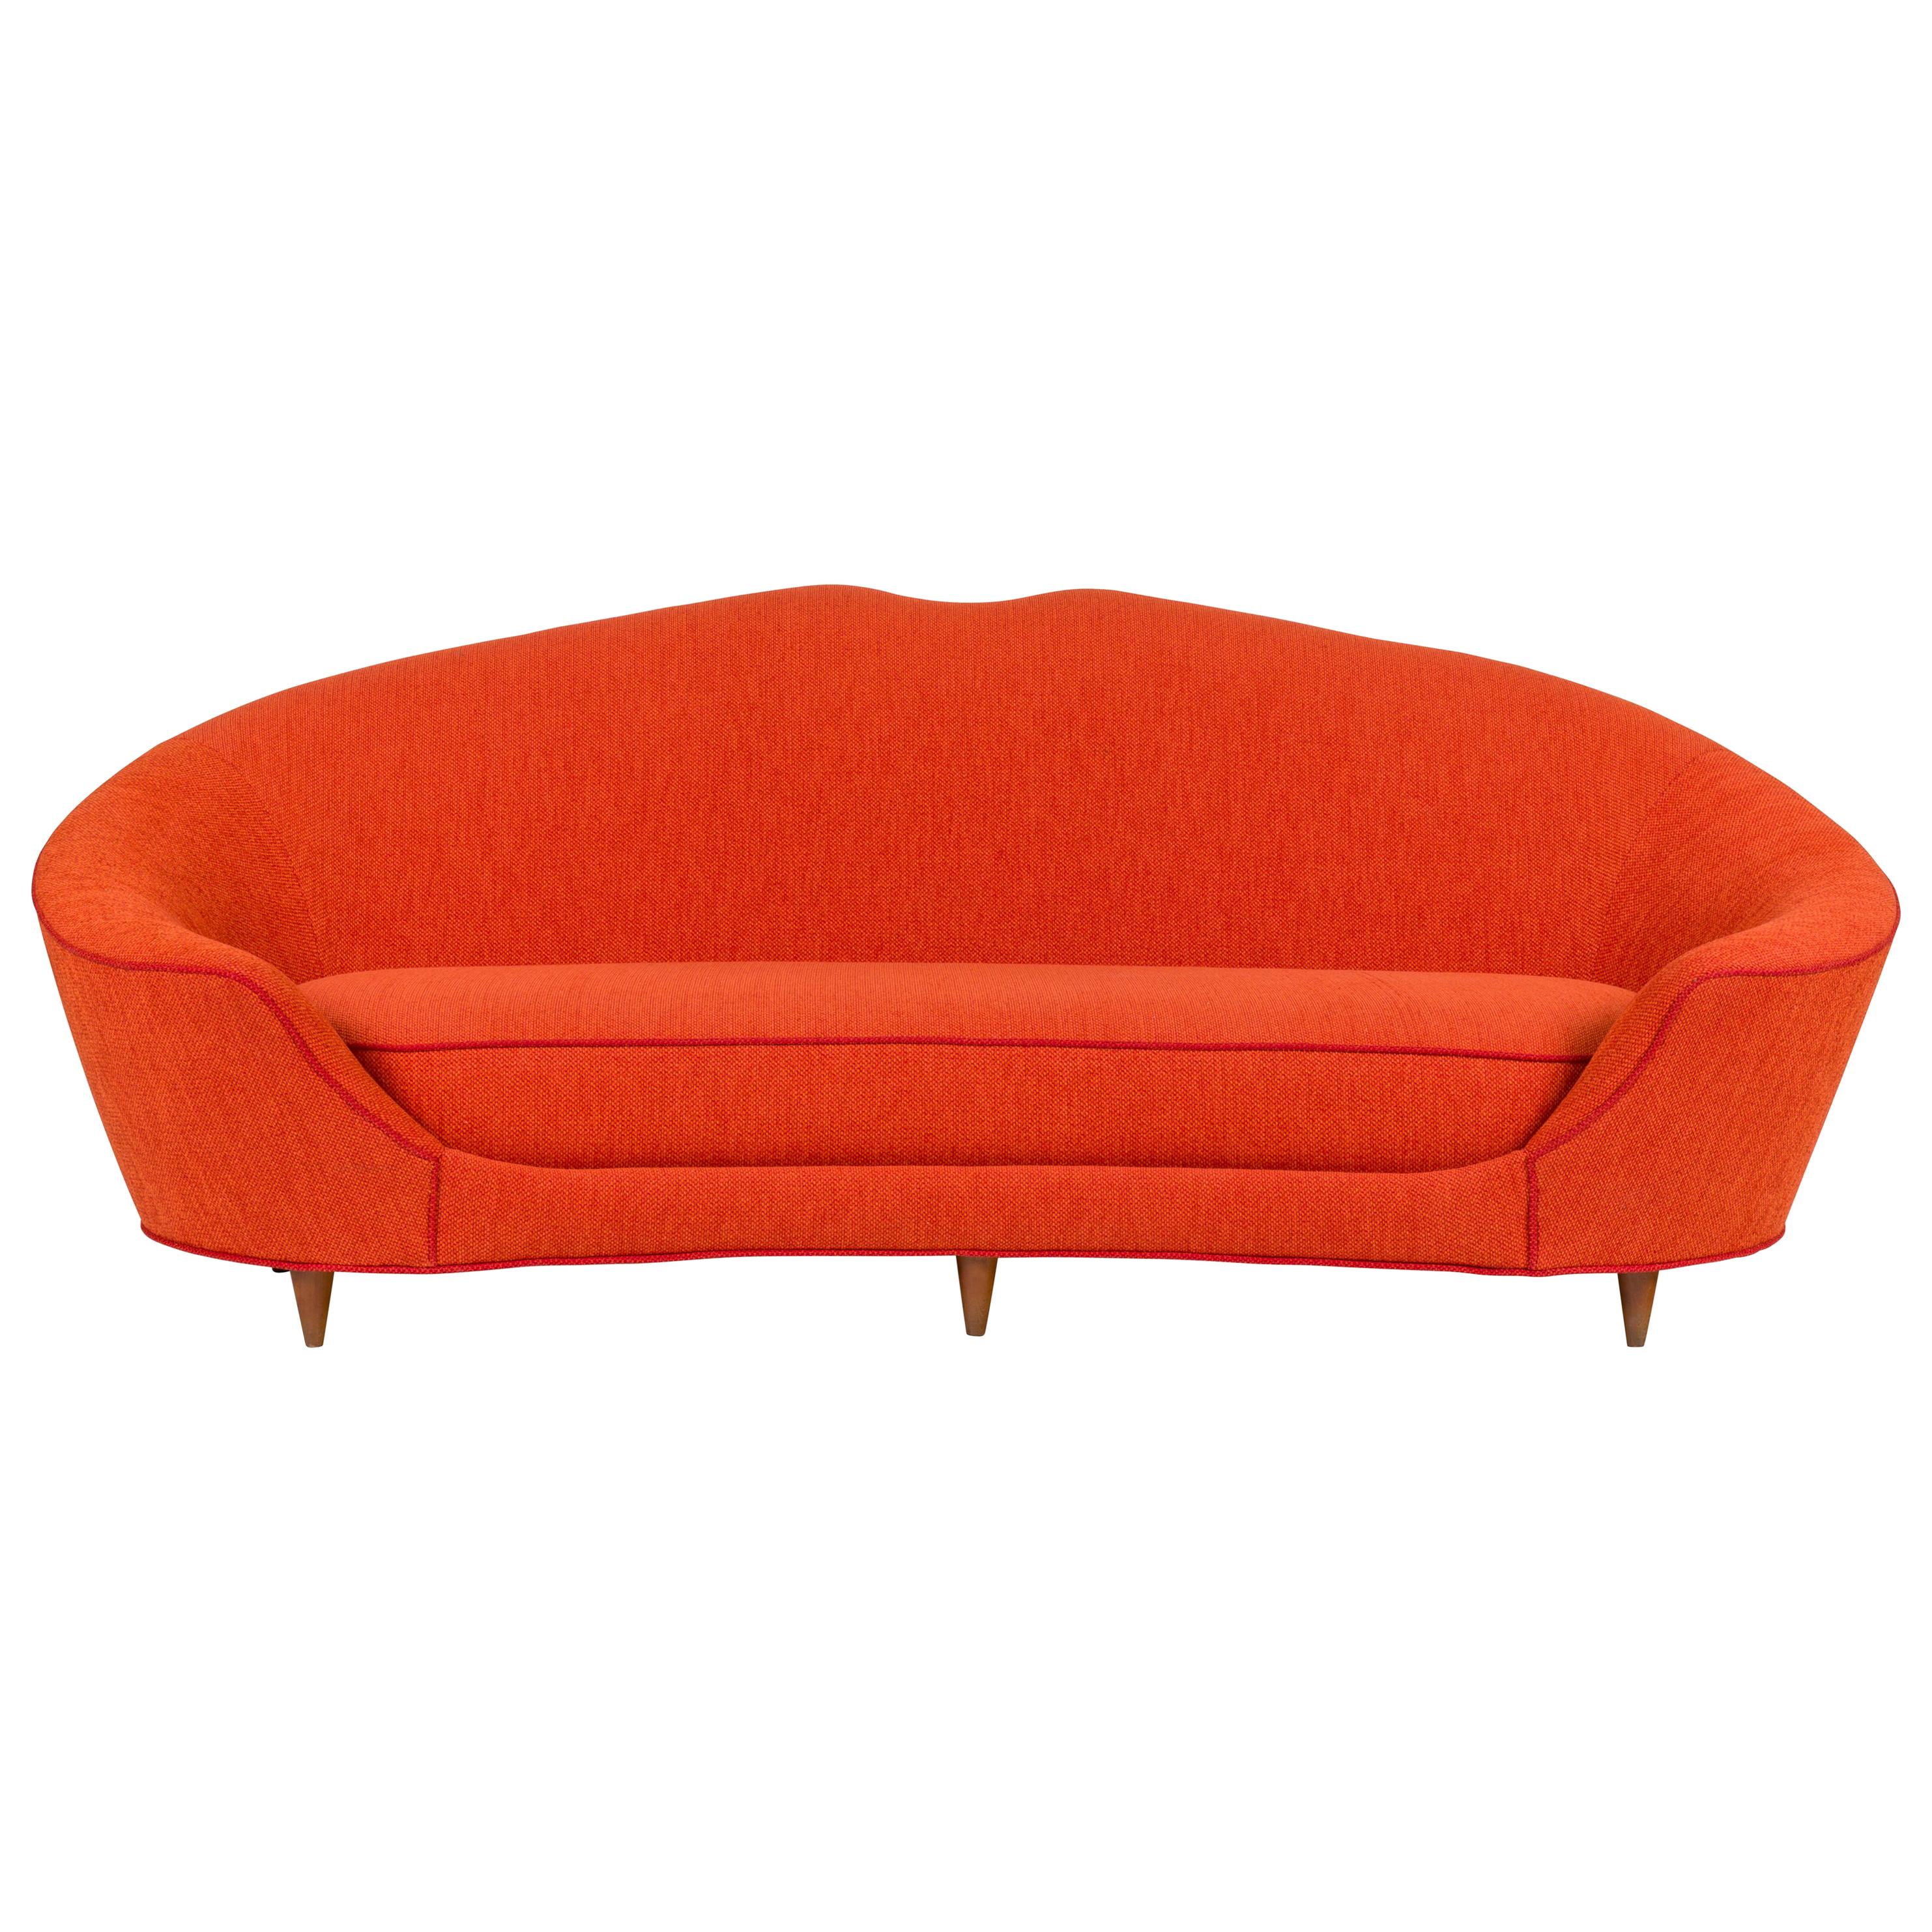 Cesare Lacca Curved Sofa Reupholstered in Orange Fabric, Italy 1950s